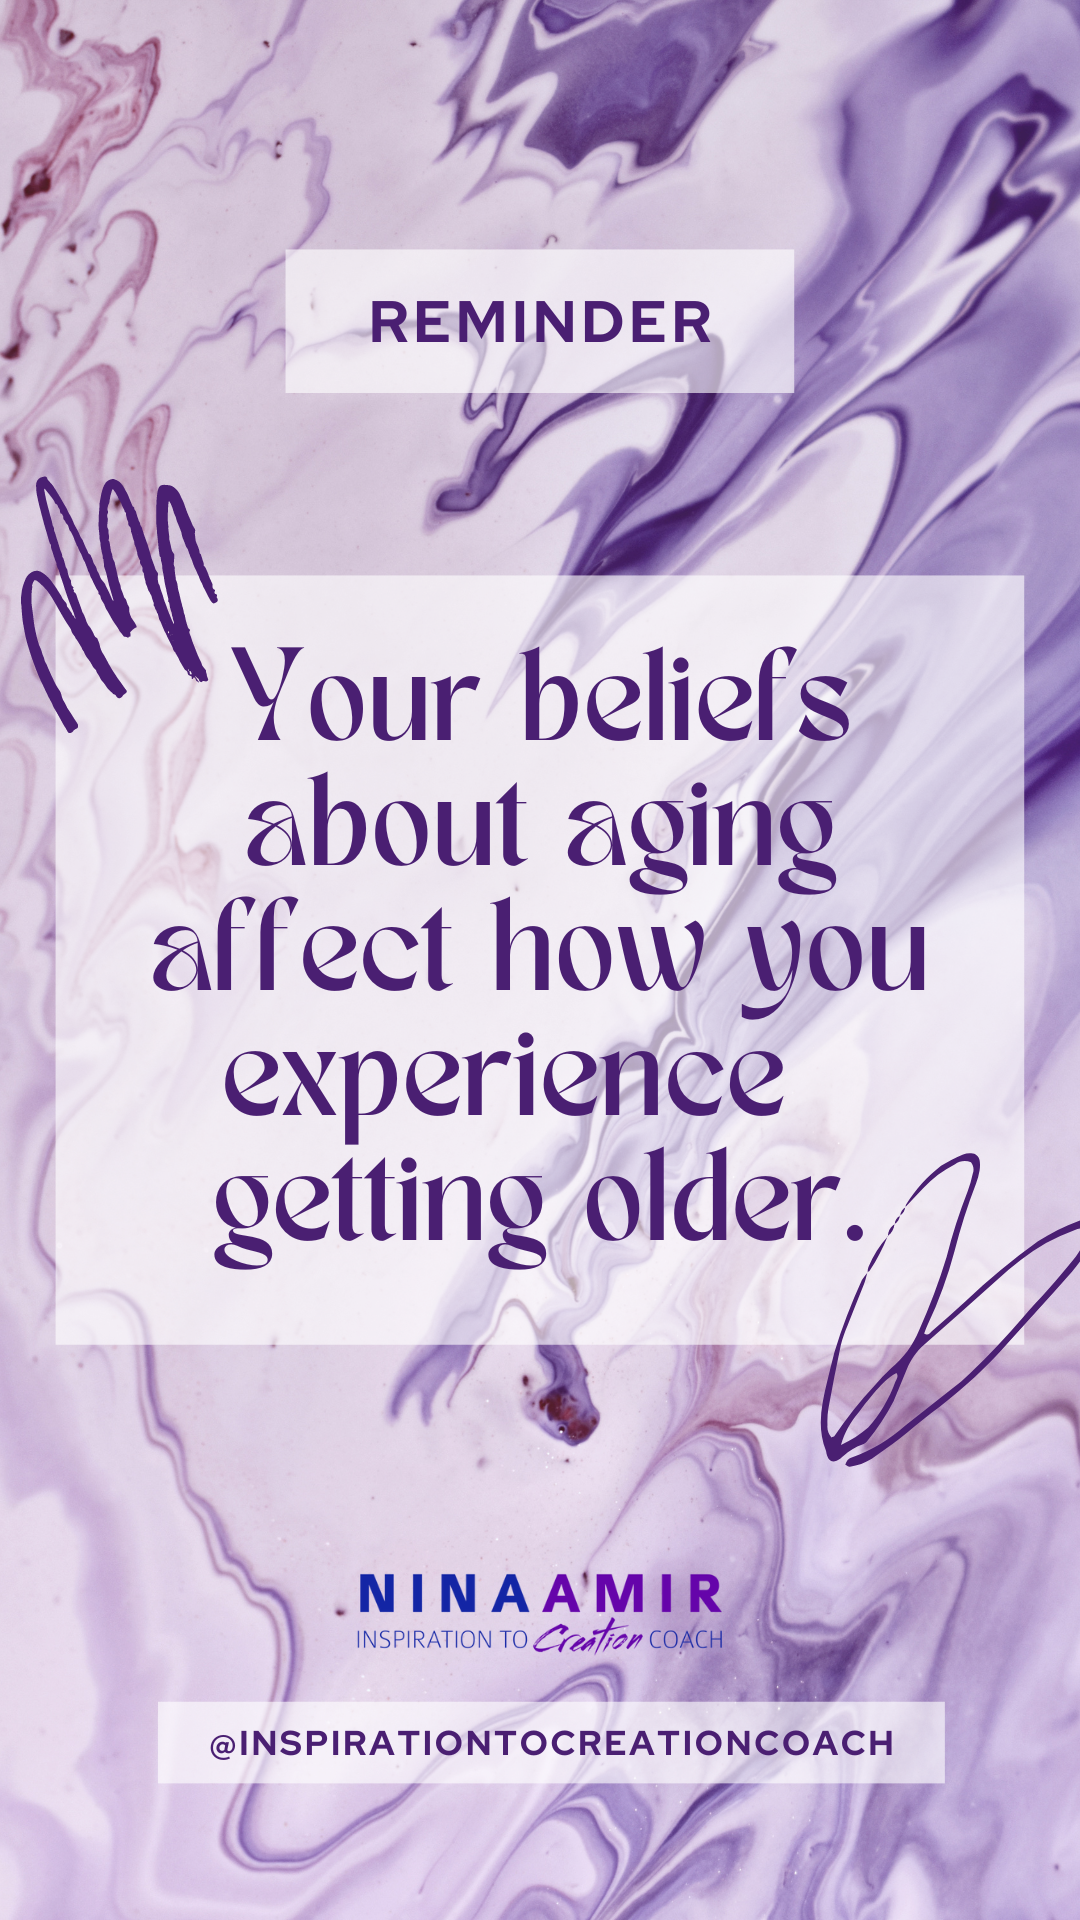 Beliefs about aging impact getting older